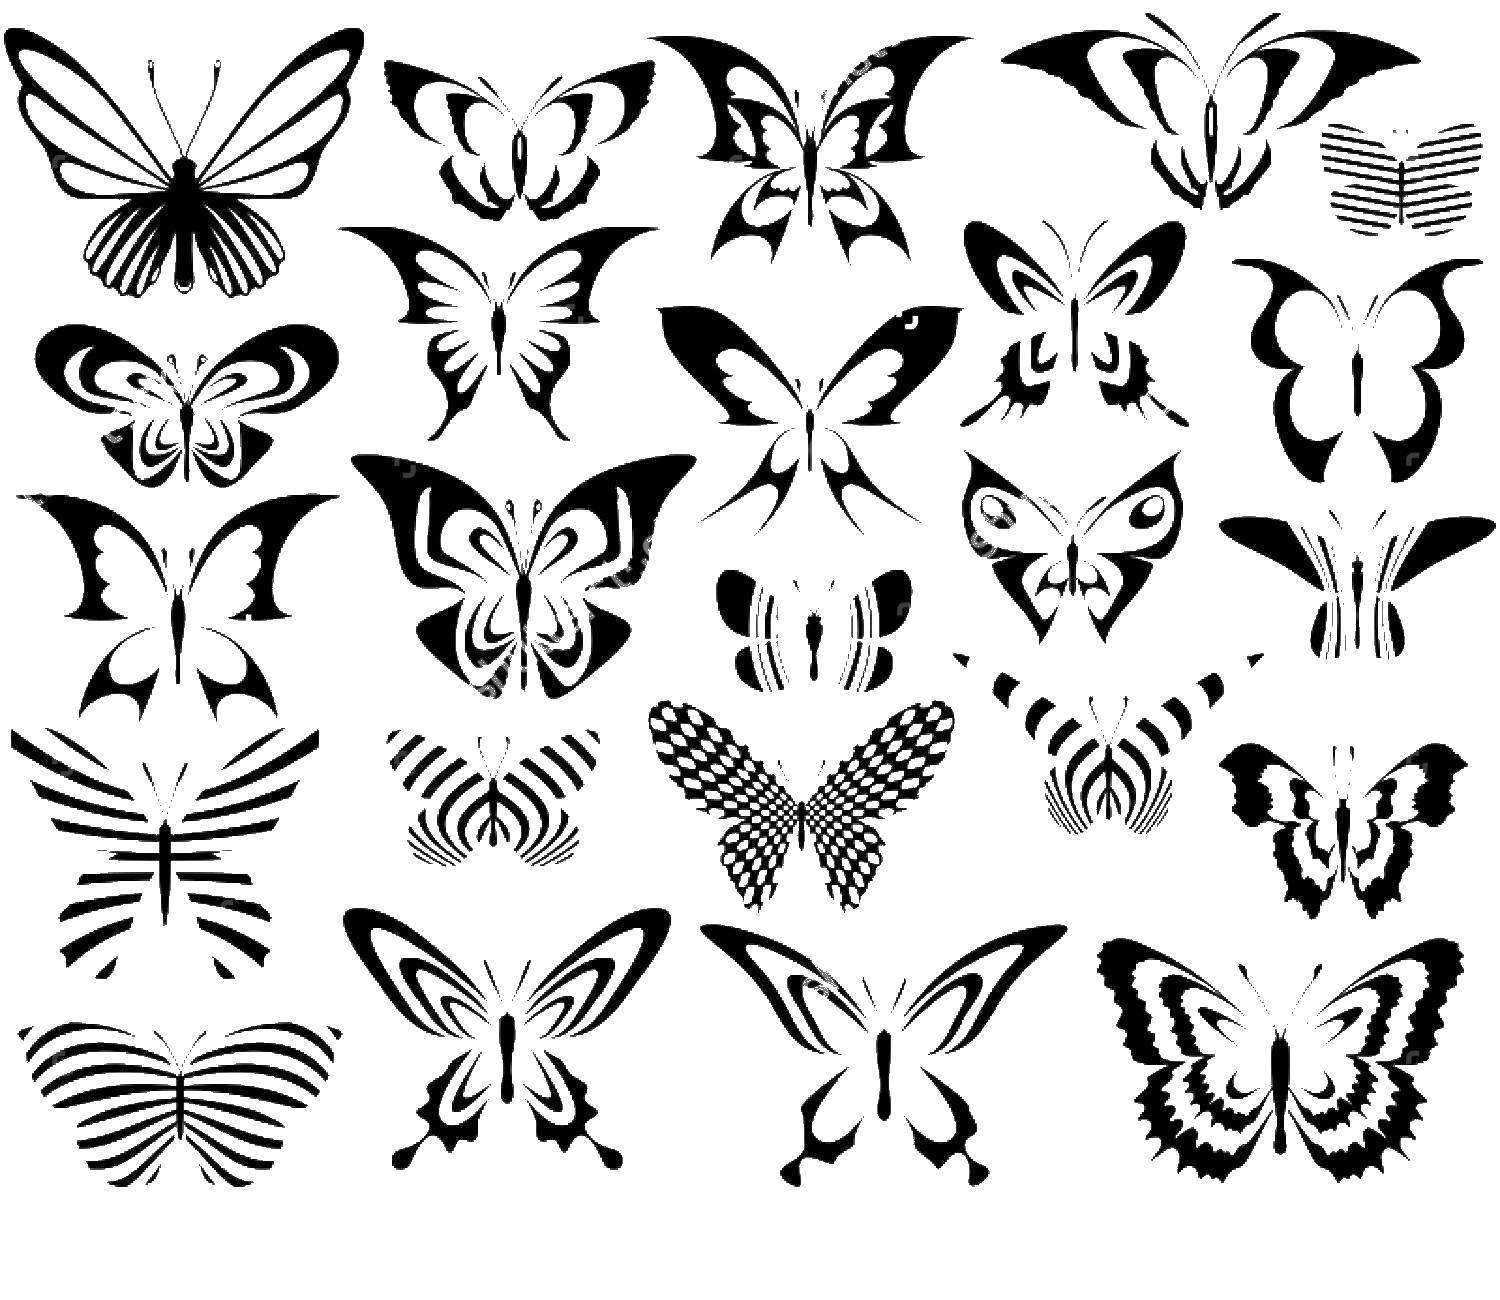 Coloring The outlines of the butterflies. Category the contours of the butterflies to cut. Tags:  Outline , butterfly.